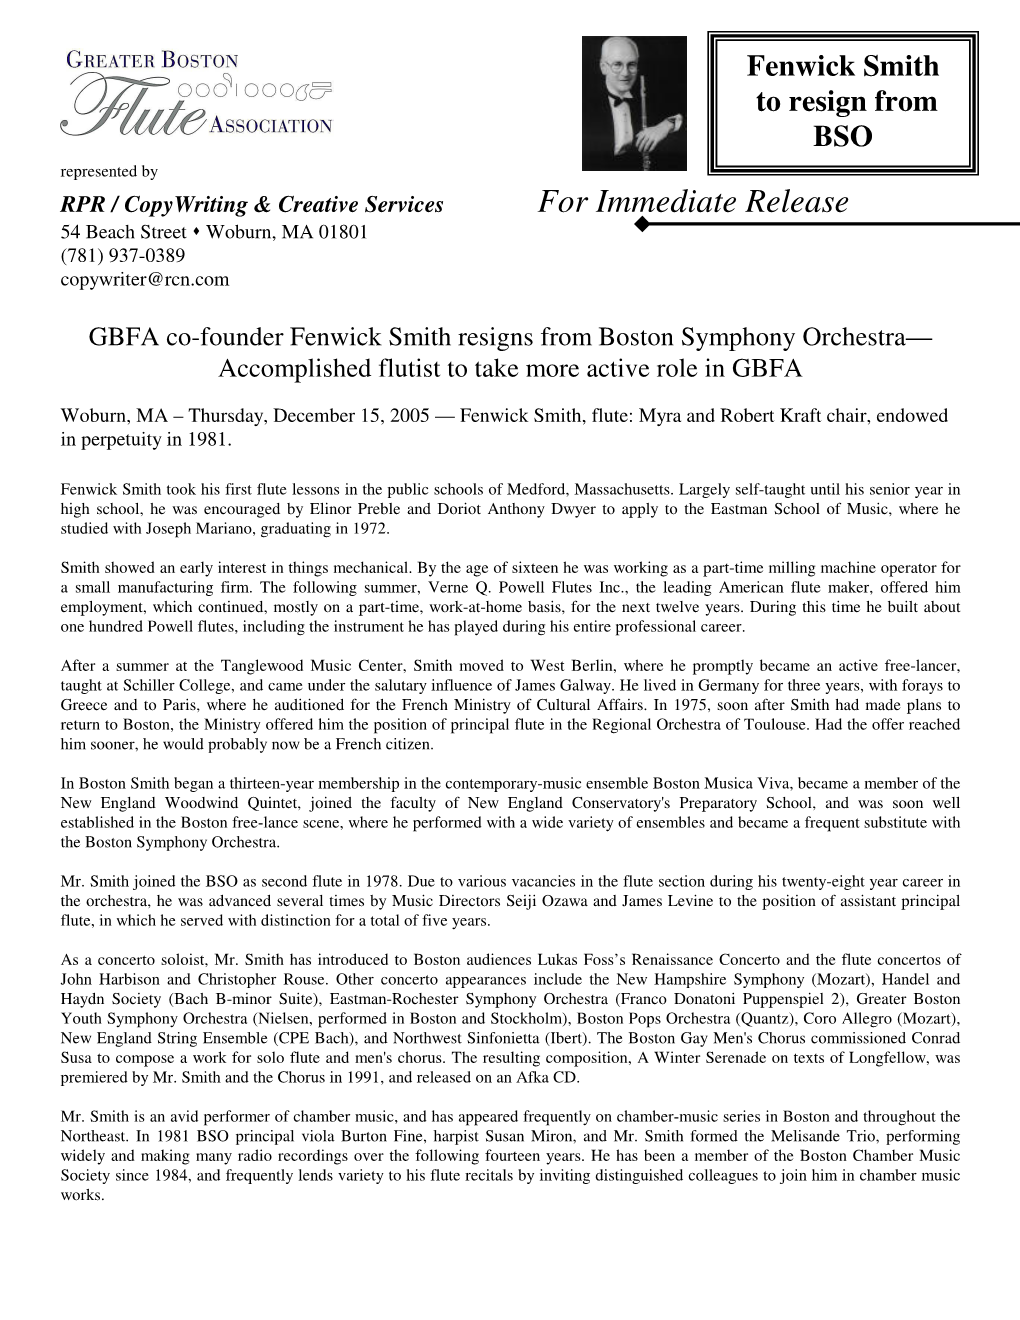 GBFA Co-Founder Fenwick Smith Resigns from Boston Symphony Orchestra— Accomplished Flutist to Take More Active Role in GBFA